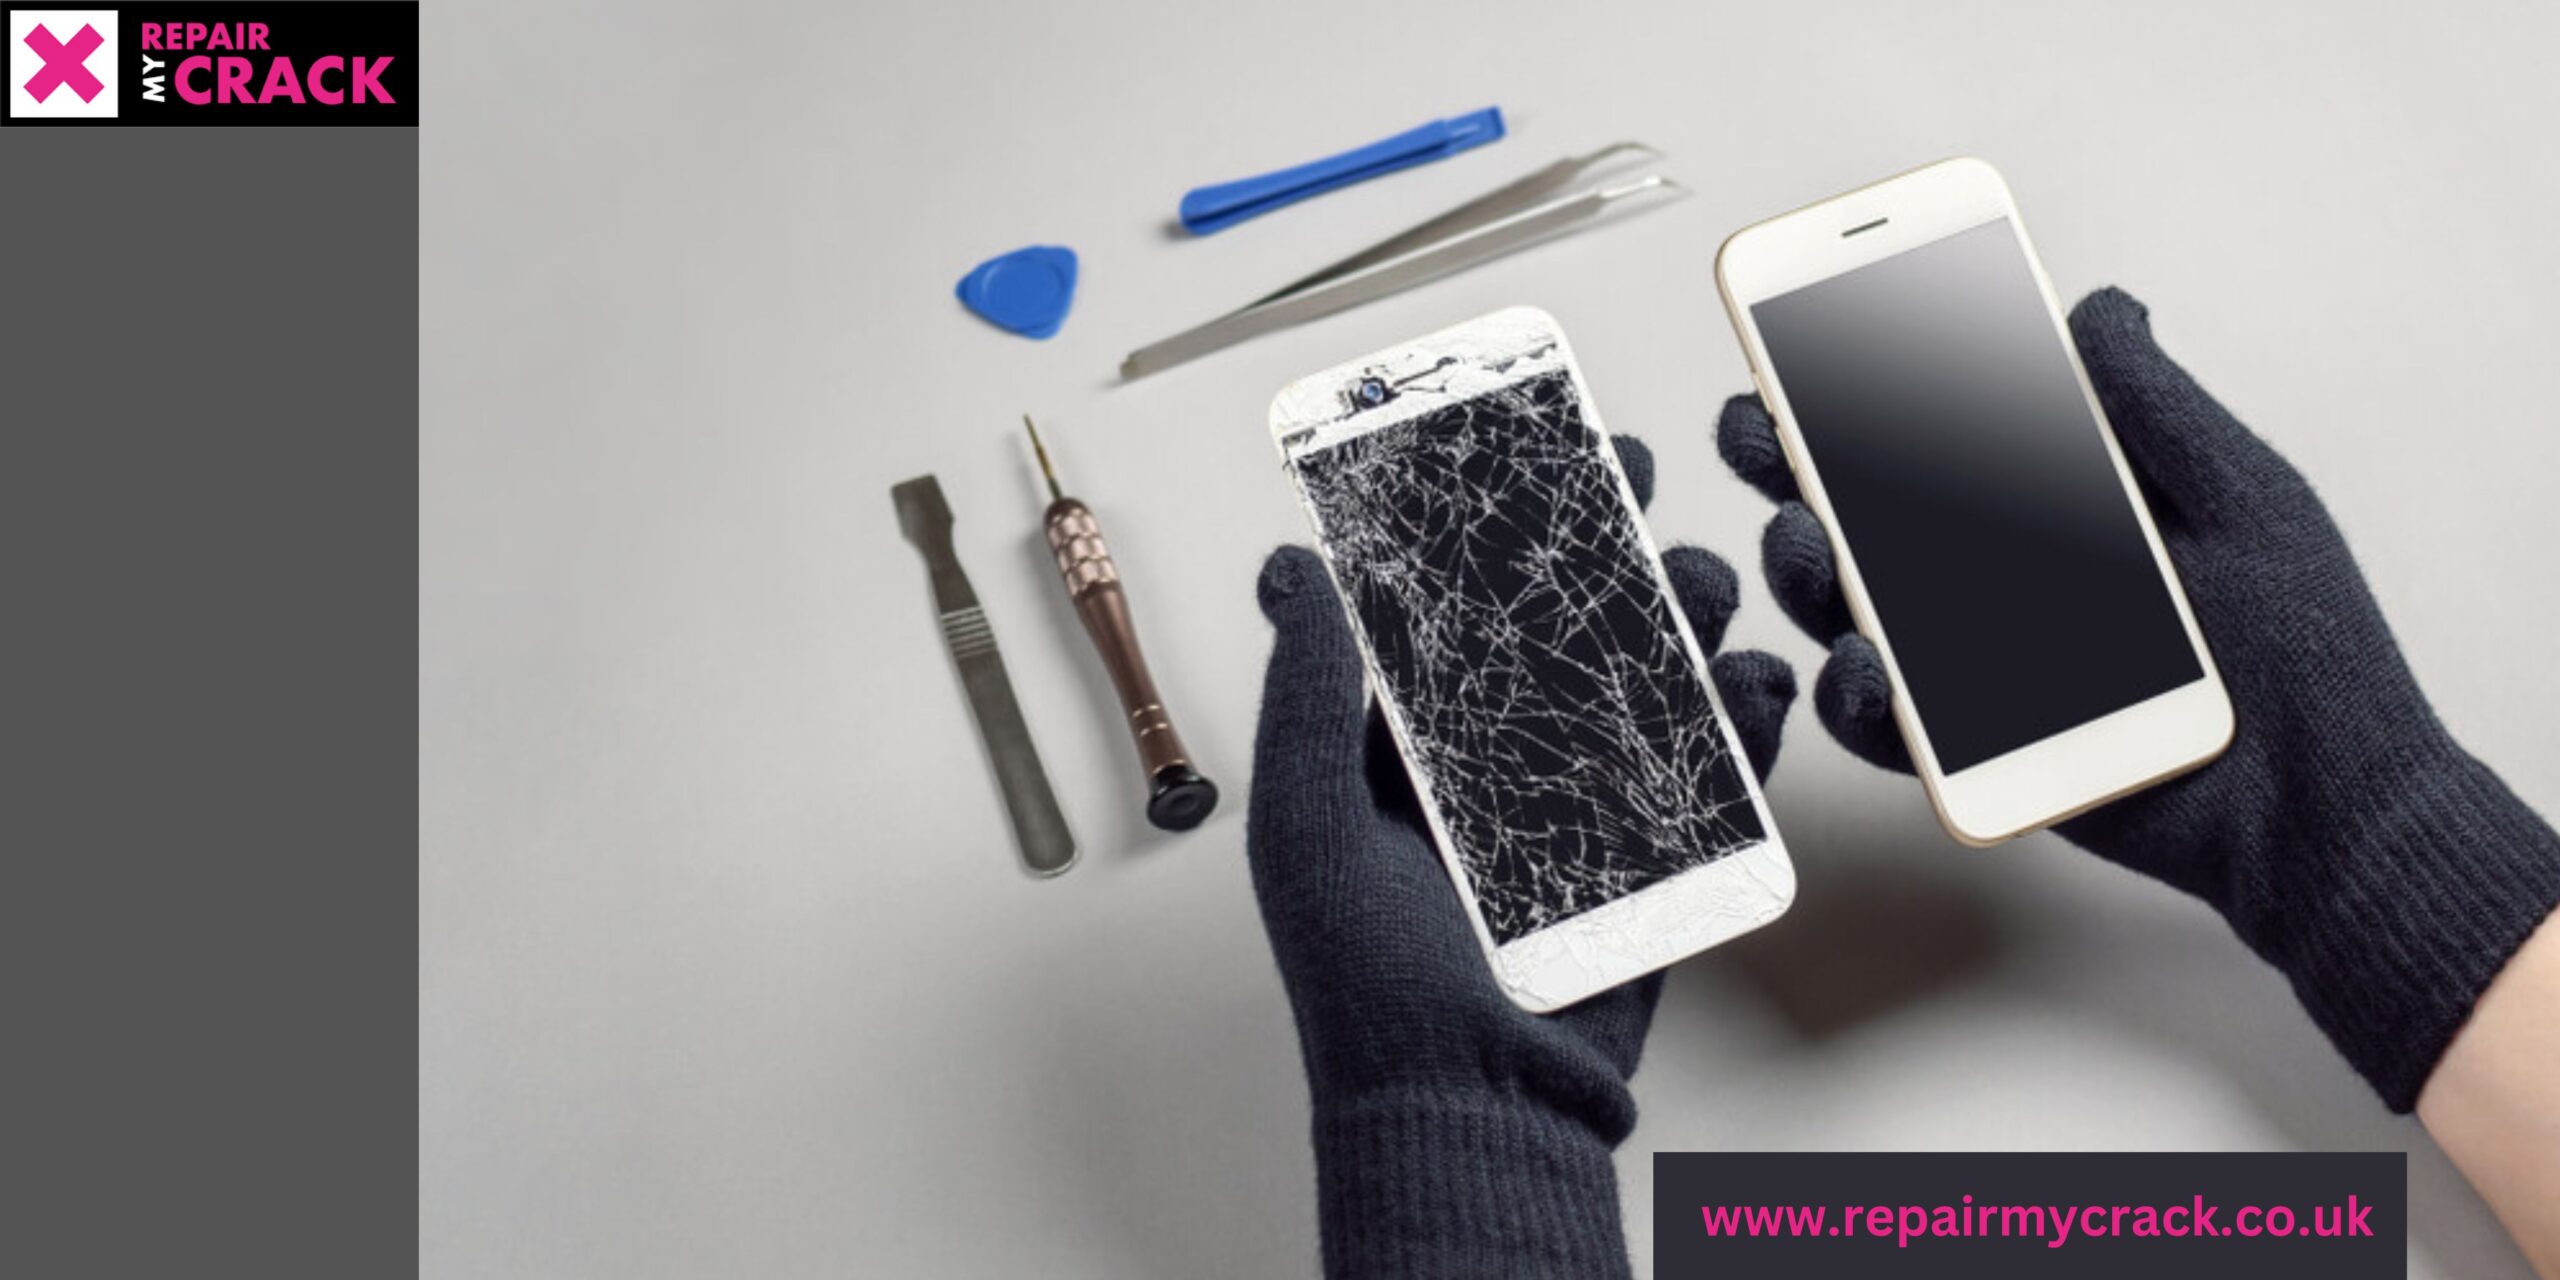 The Most Common iPhone Issues We Repair at Repair My Crack